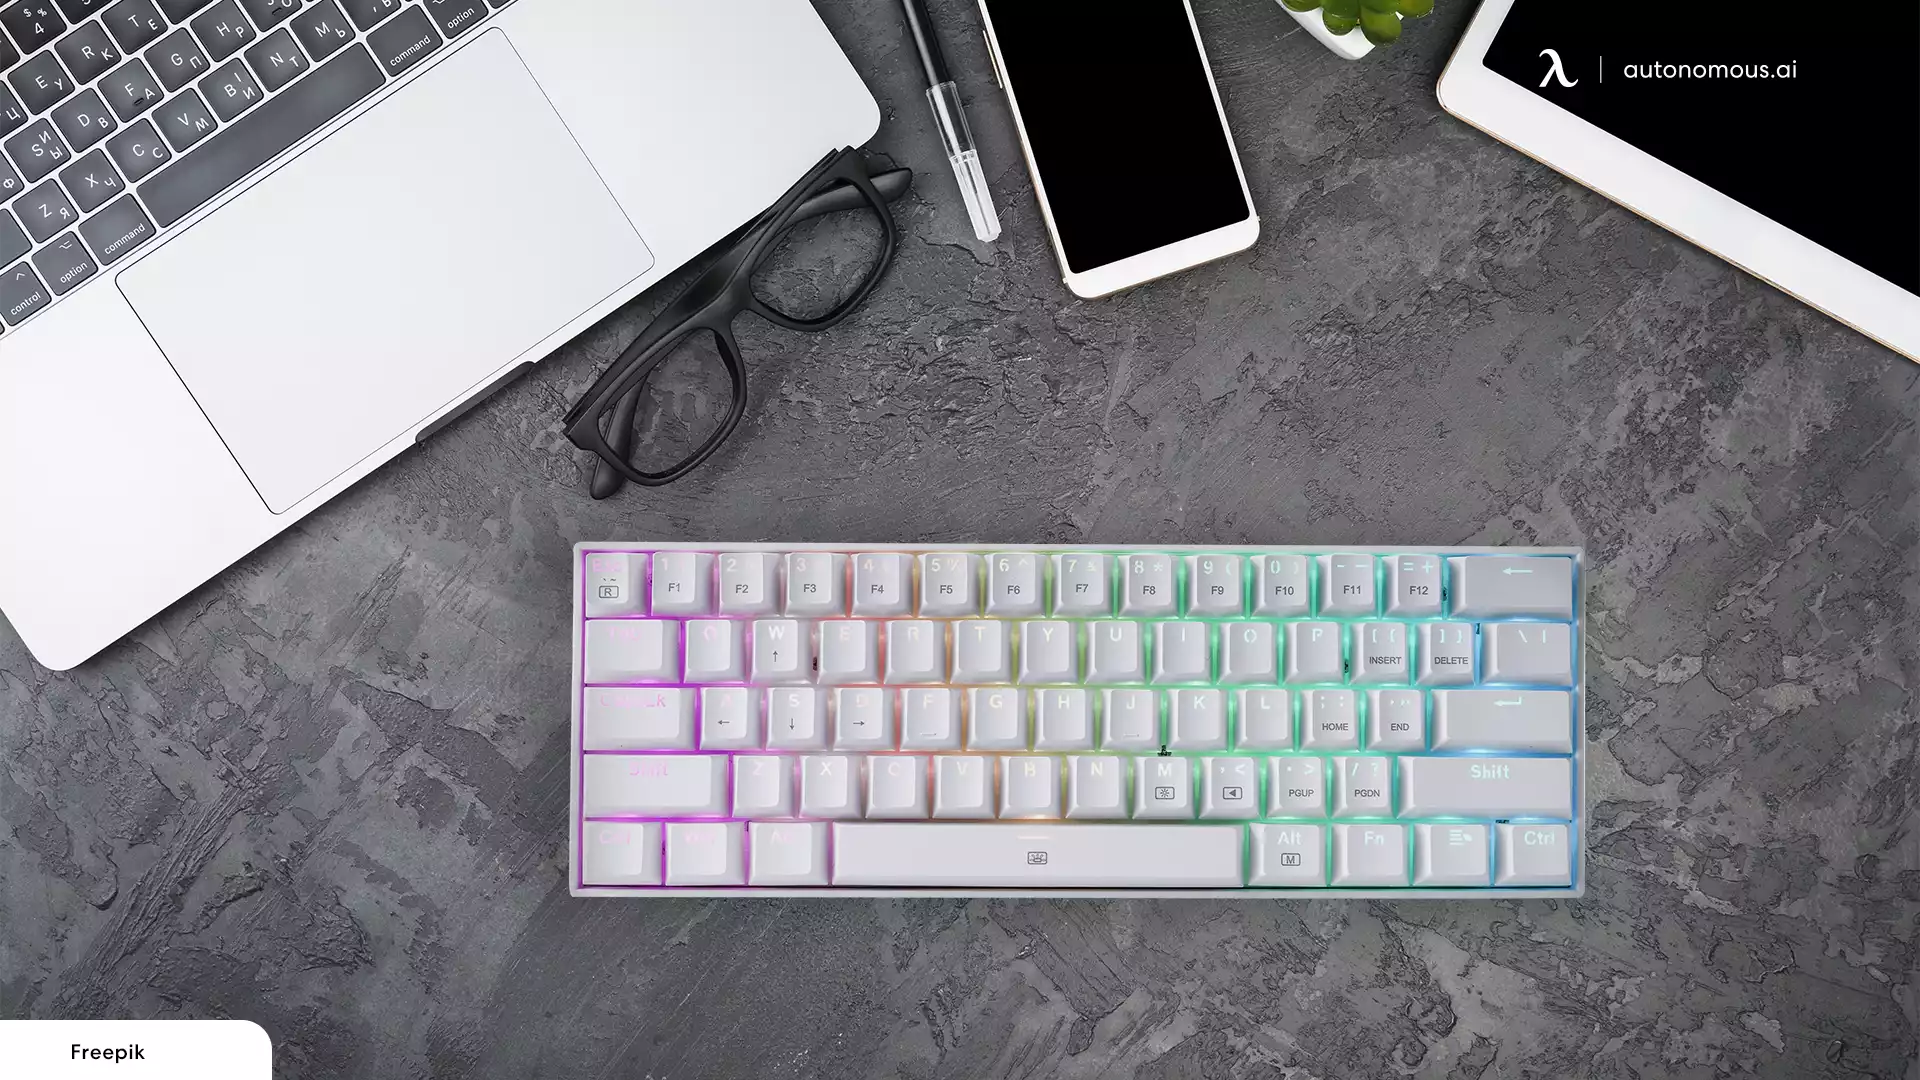 What Is a 60% Keyboard?